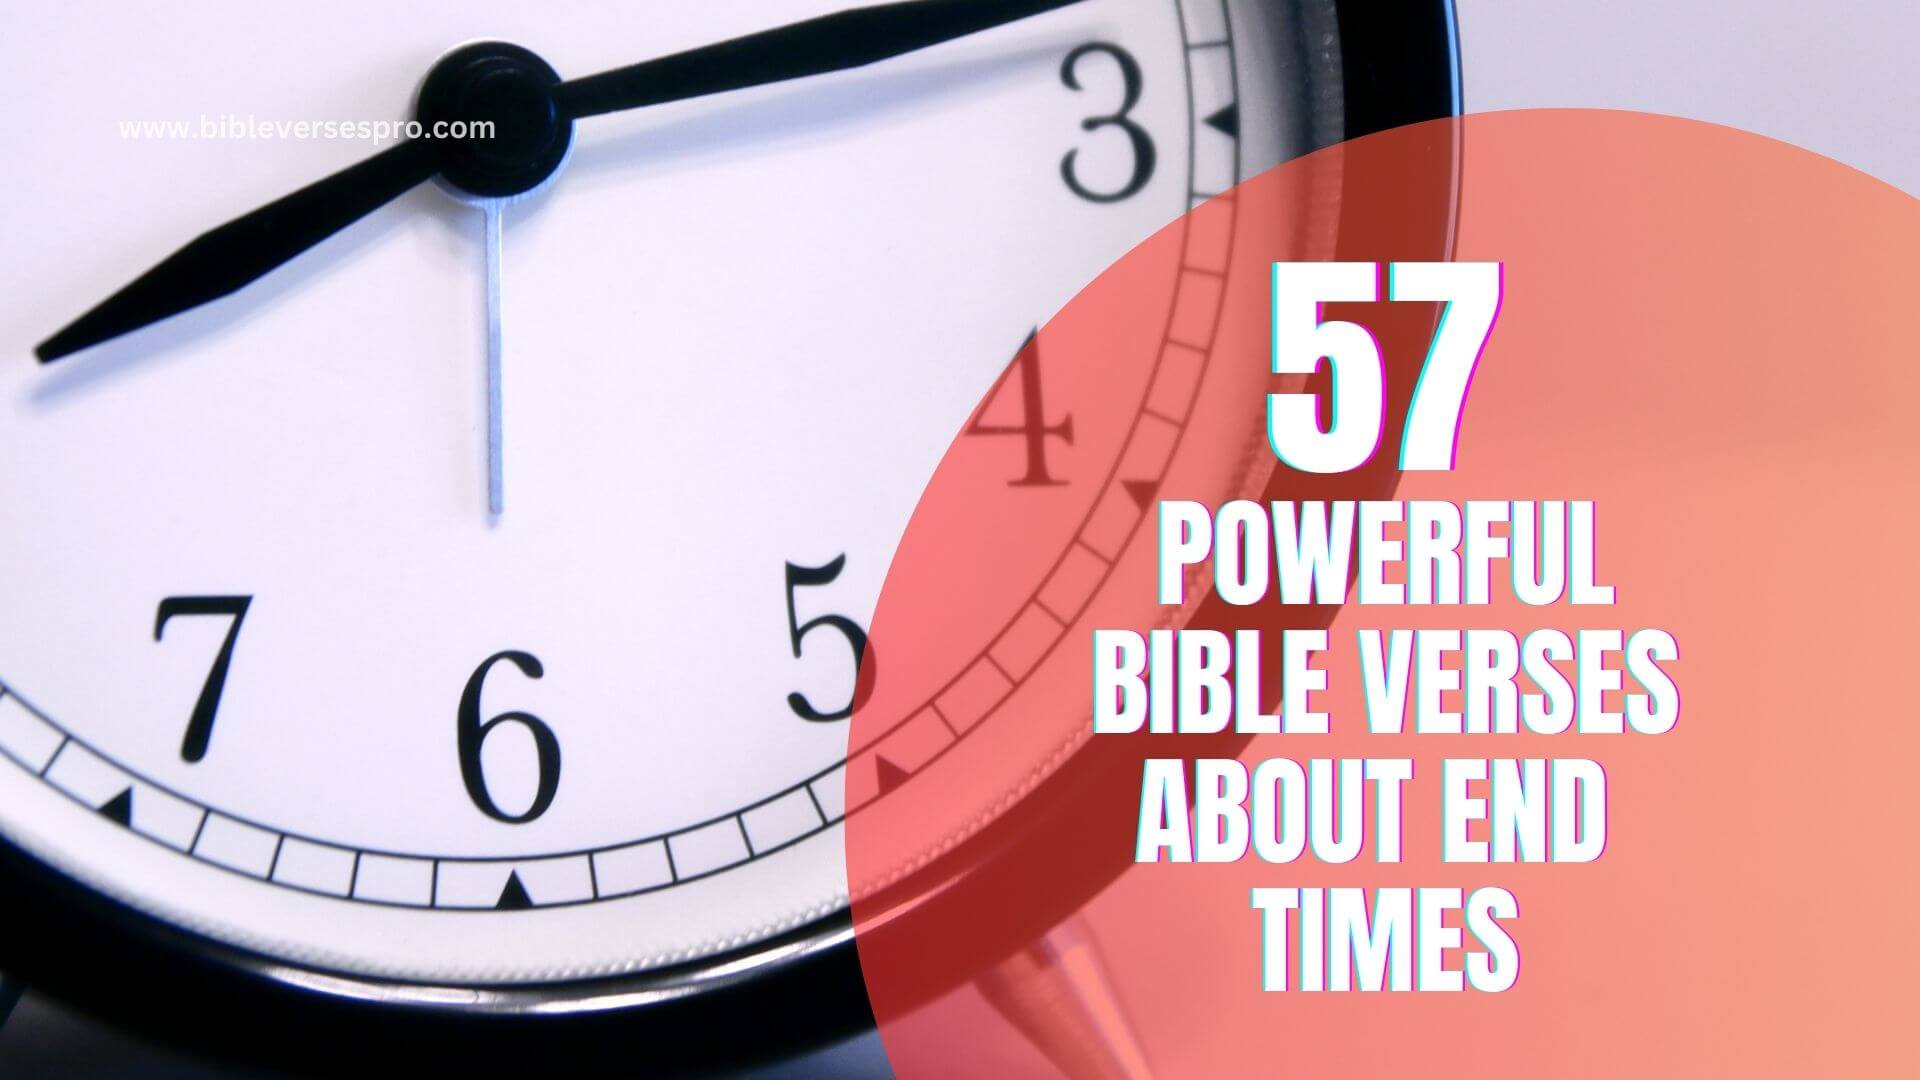 Powerful Bible Verses About End Times (1)